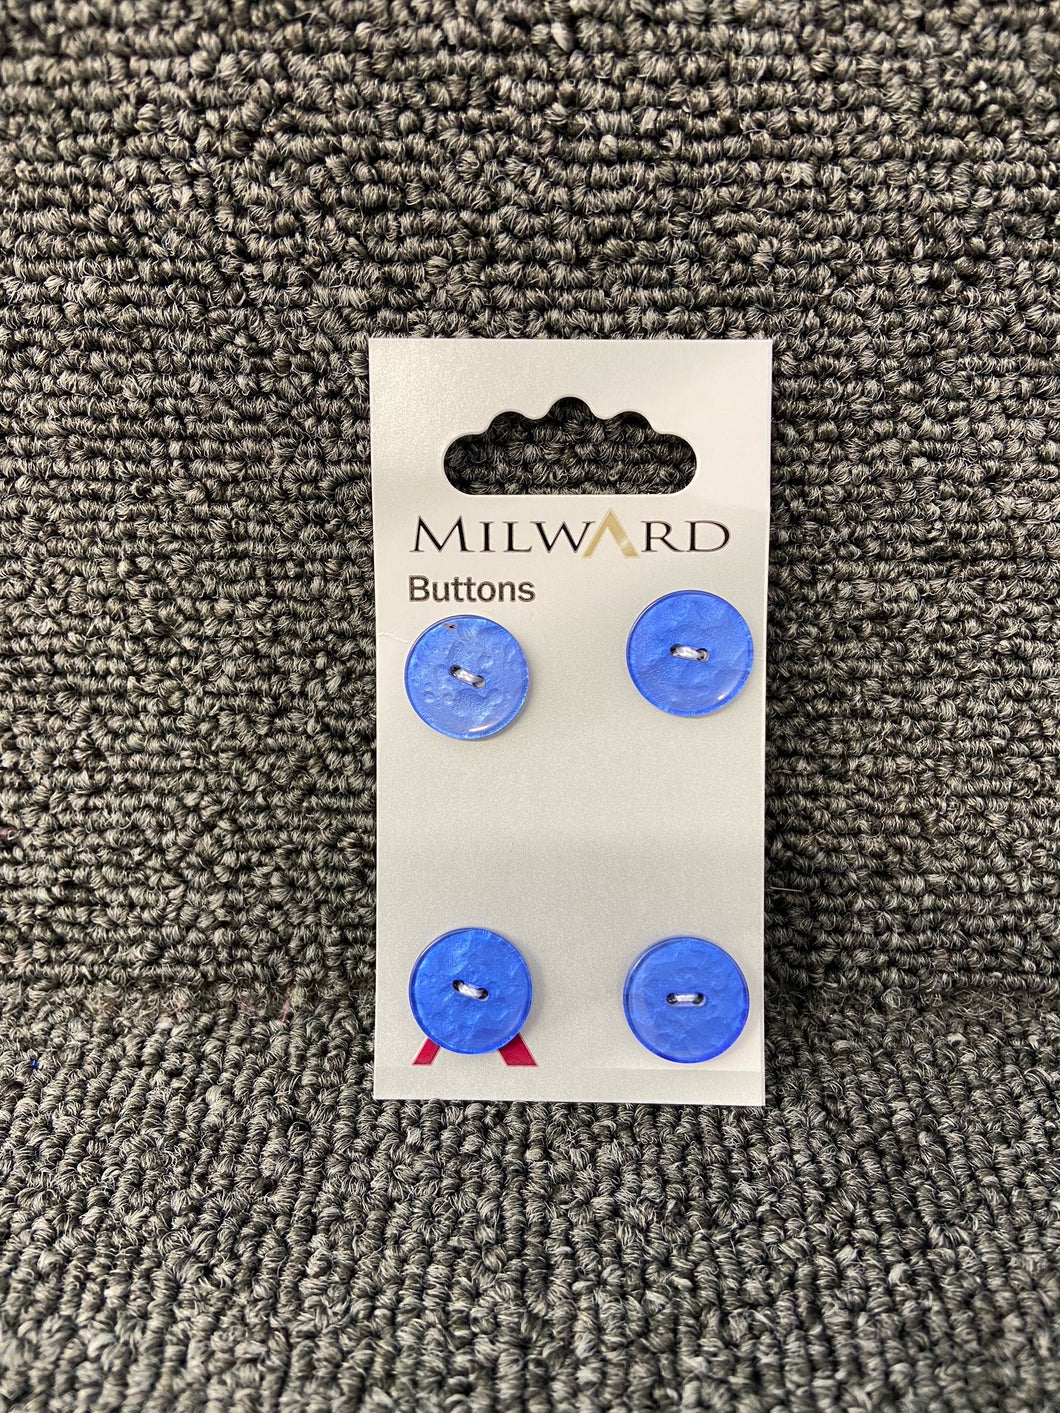 milward button buttons Blue Puddle Textured Two Hole 15mm Pack of 4 Code C 01192